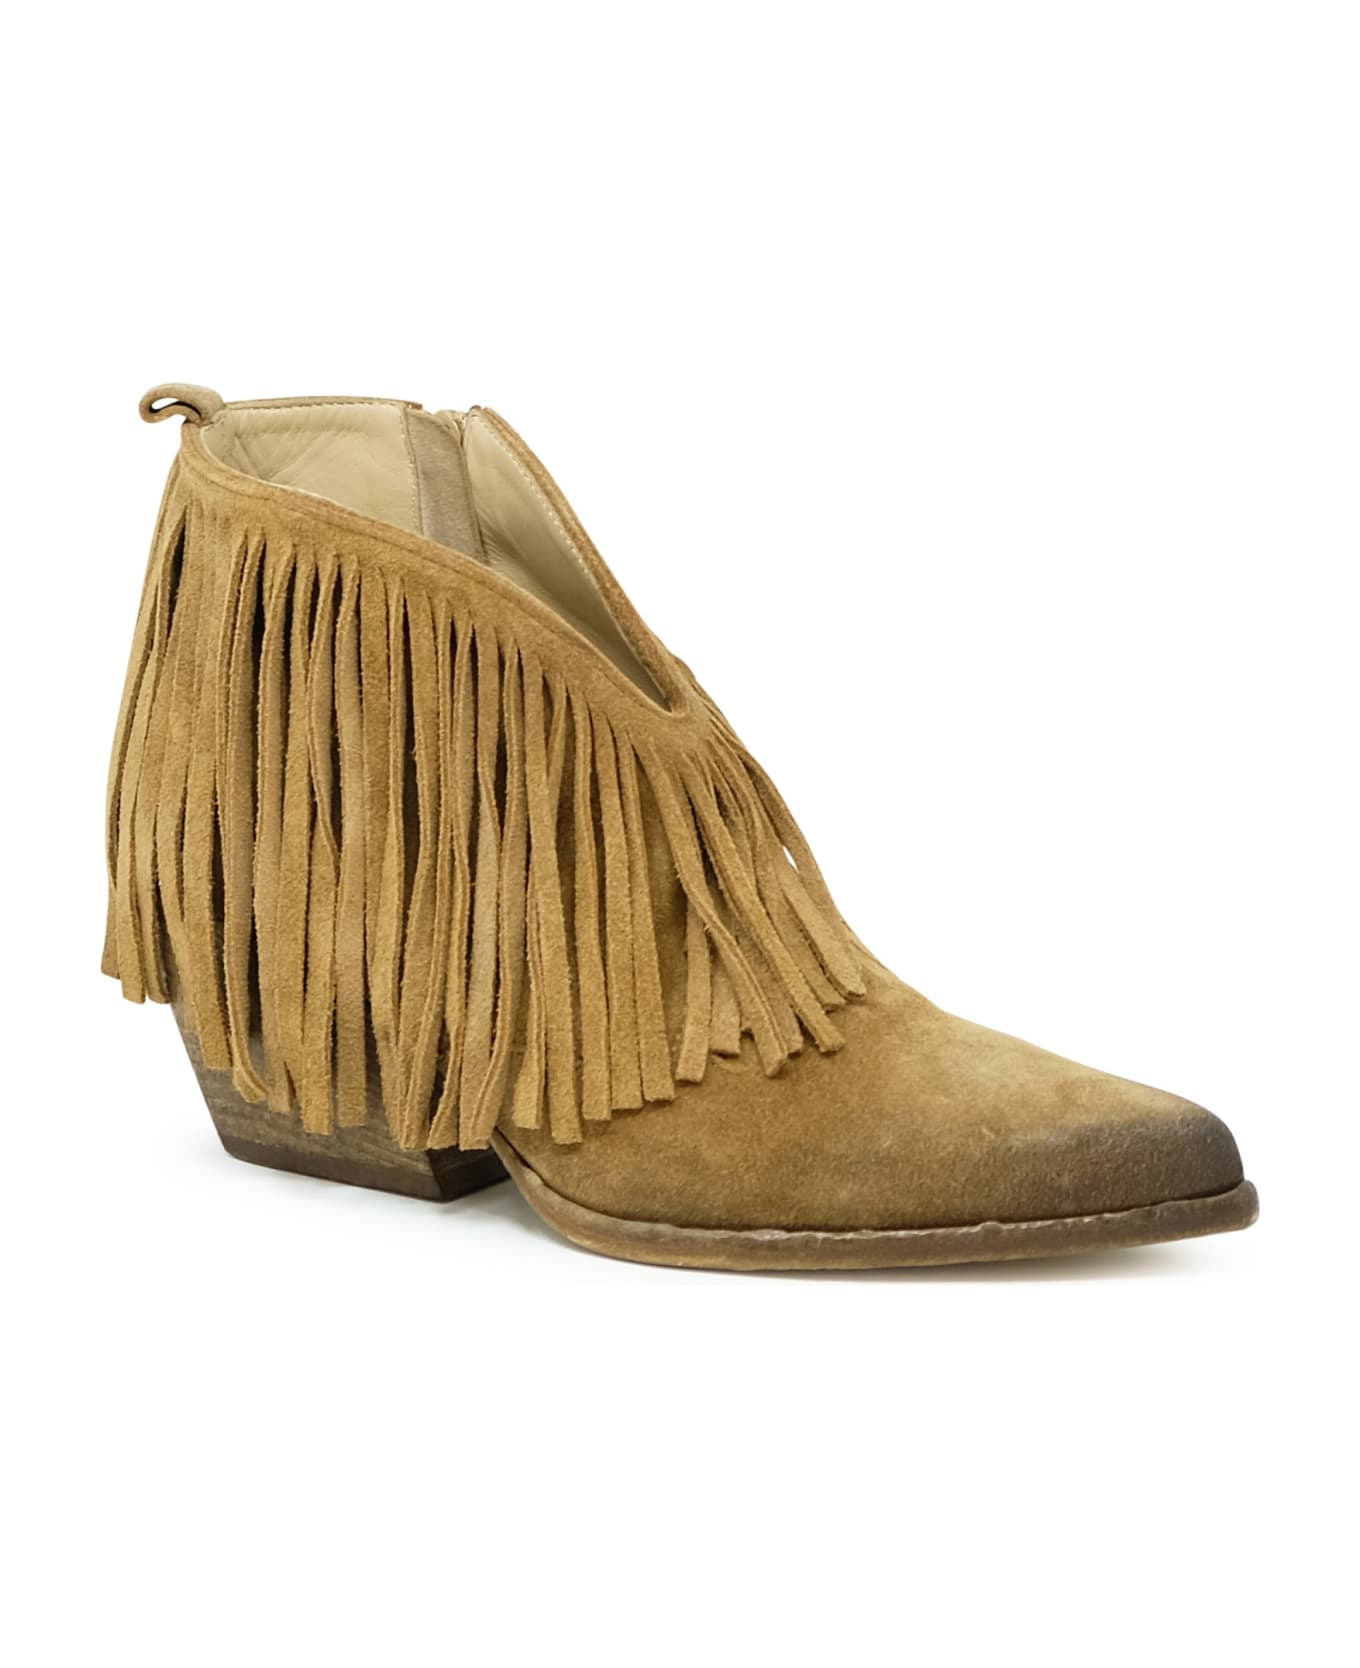 Elena Iachi Brown Suede Ankle Boots - BROWN